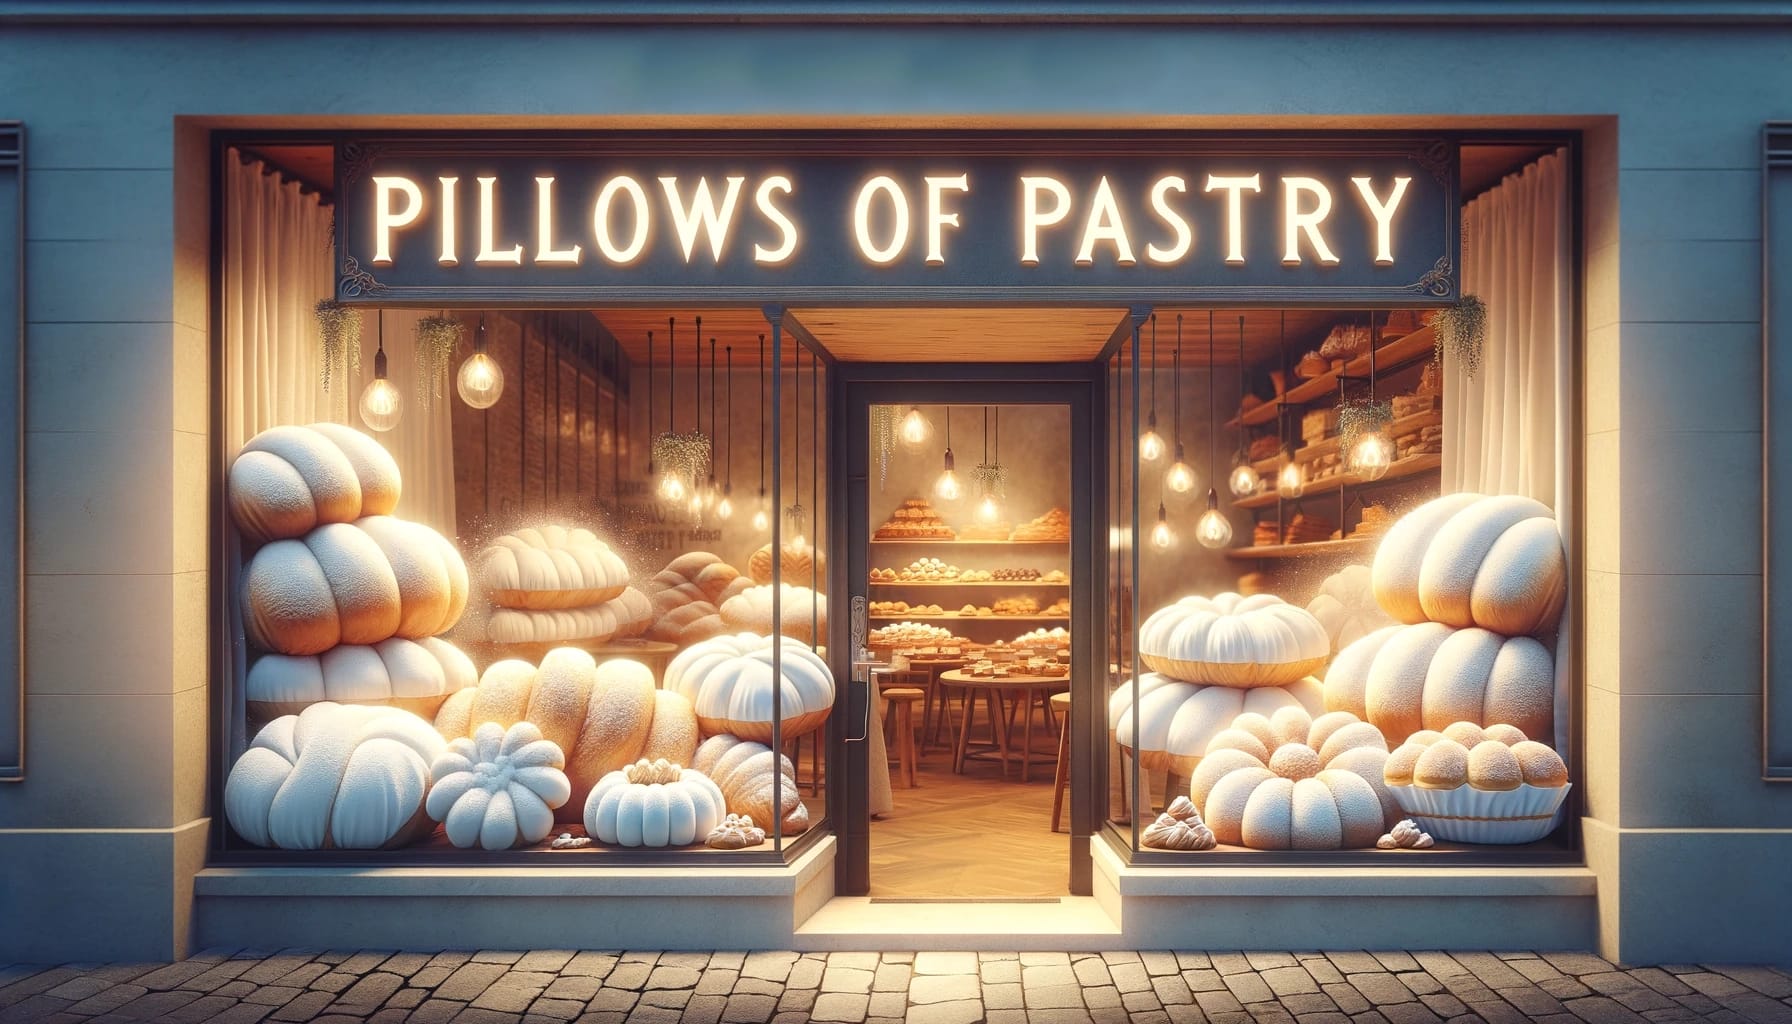 An example of a metaphor infused bakery name.